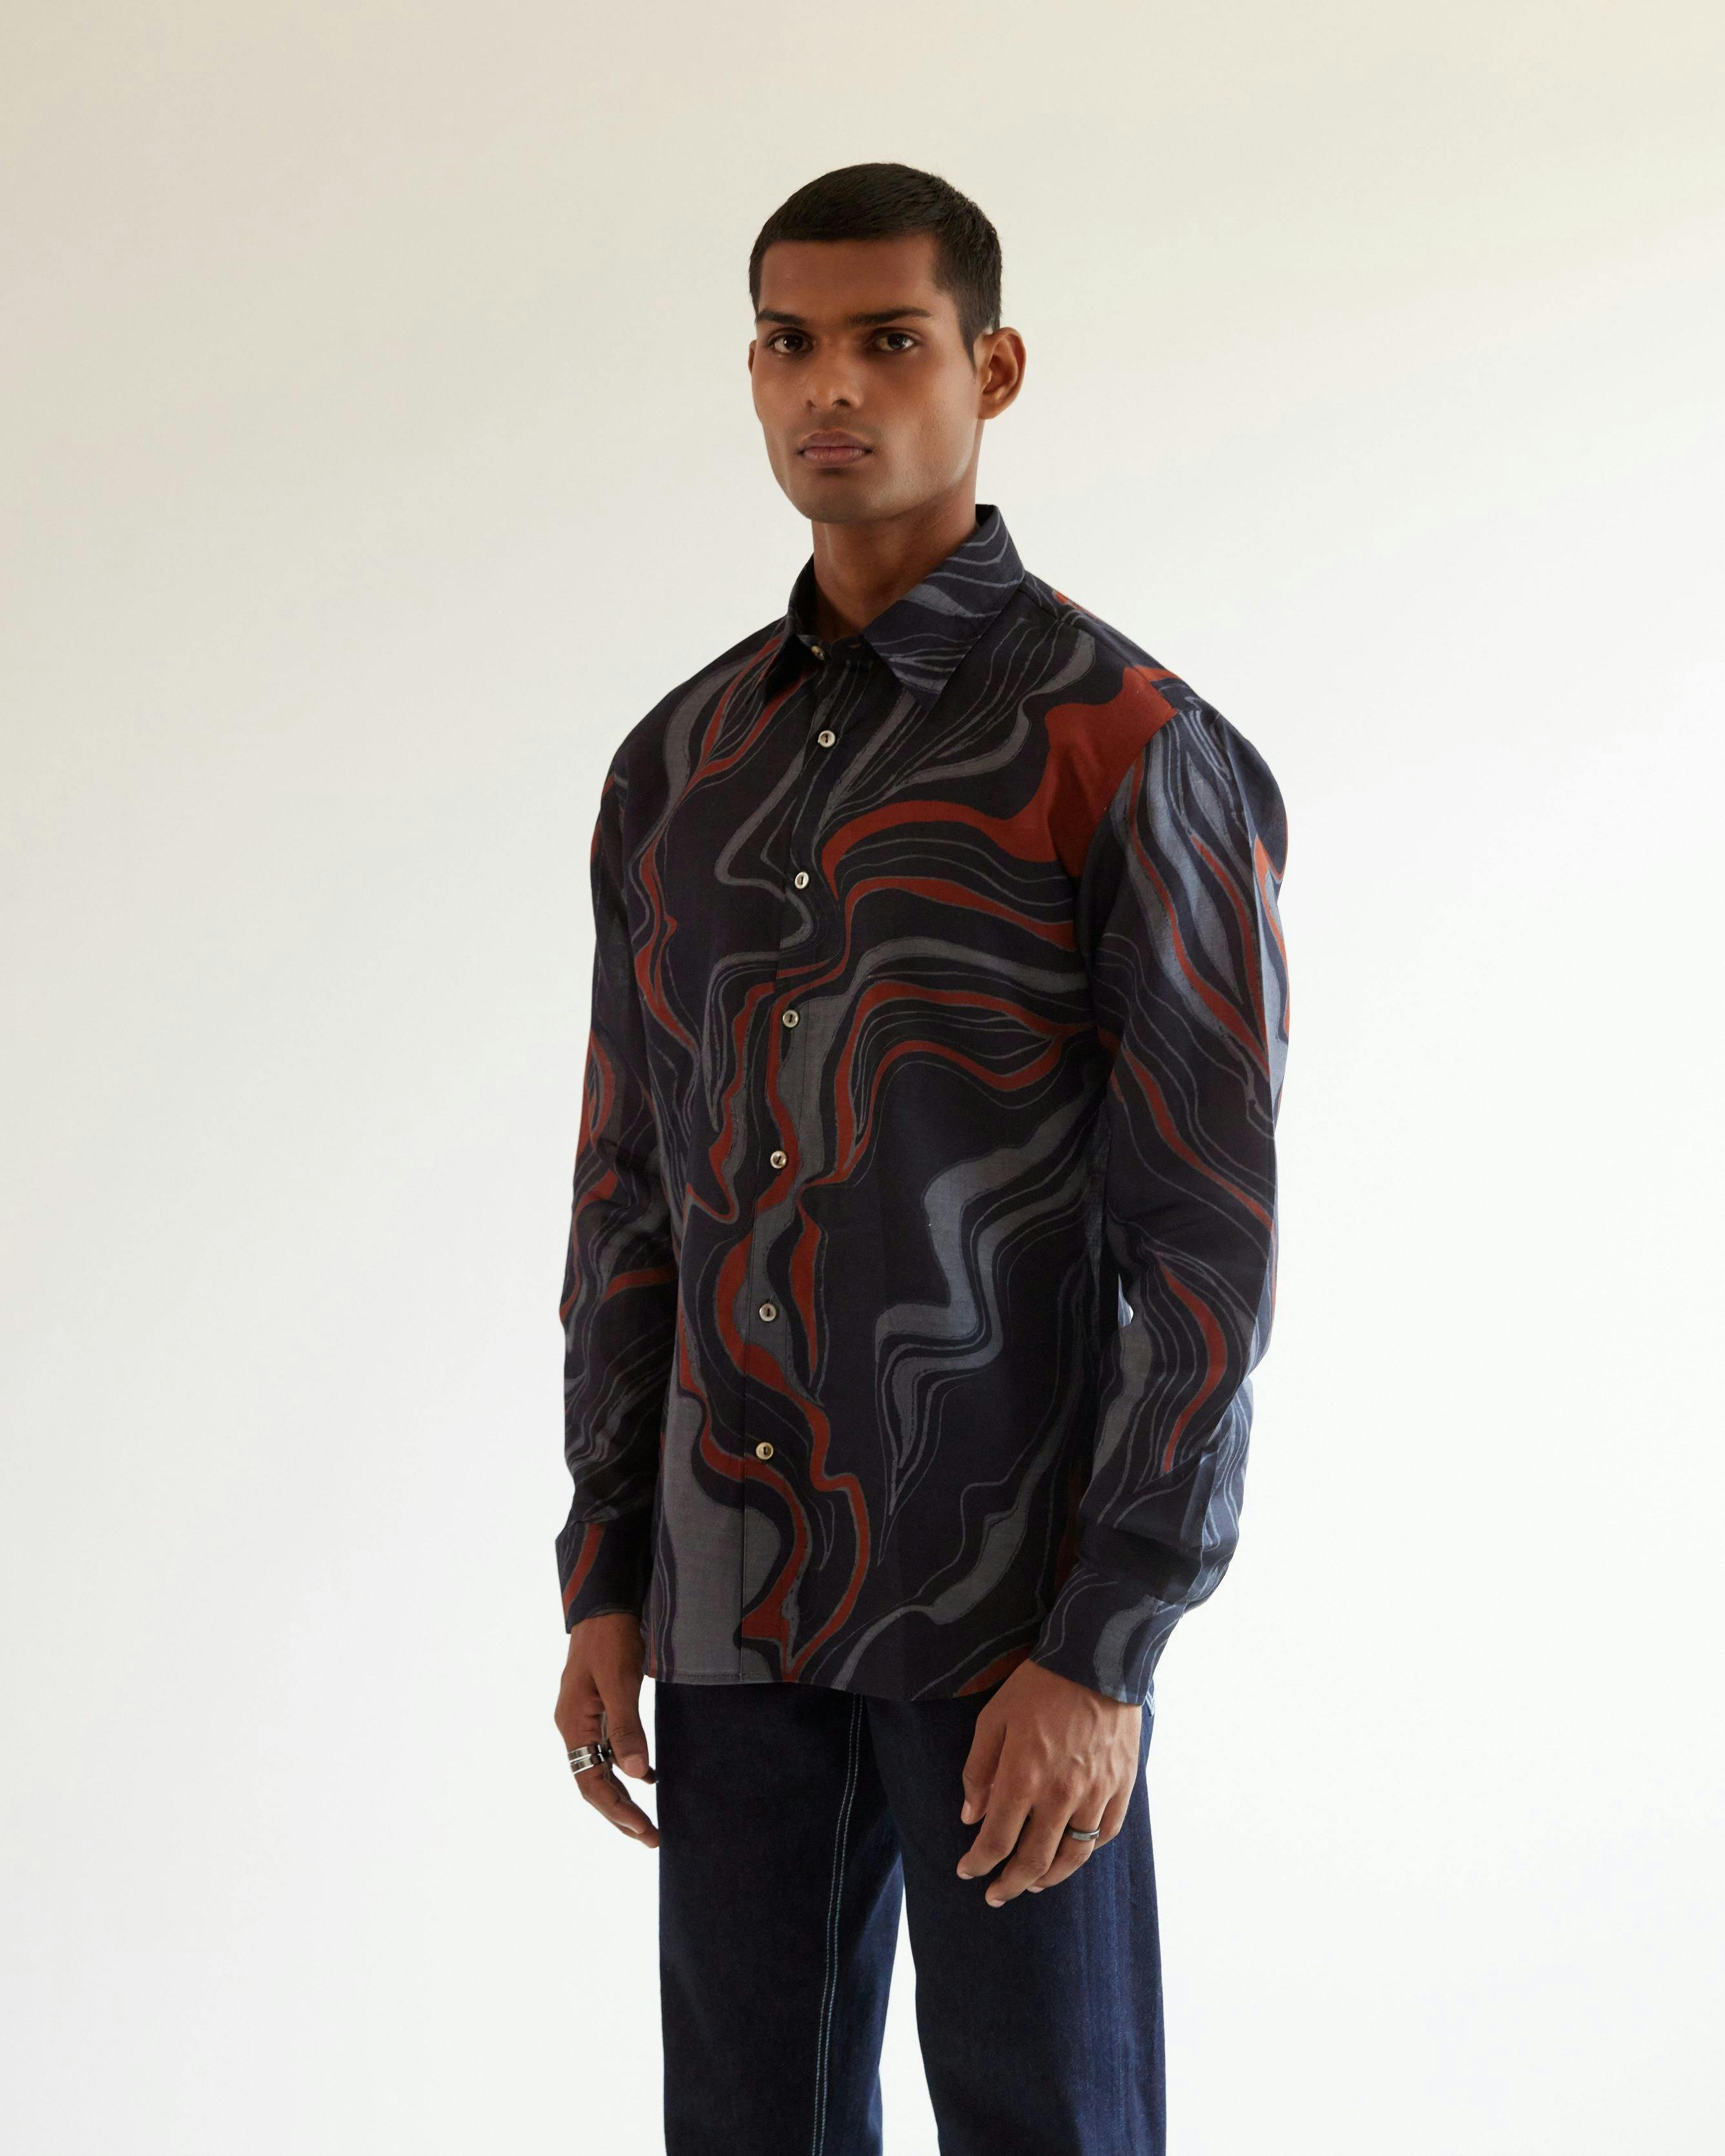 Infinity Print Shirt, a product by Country Made